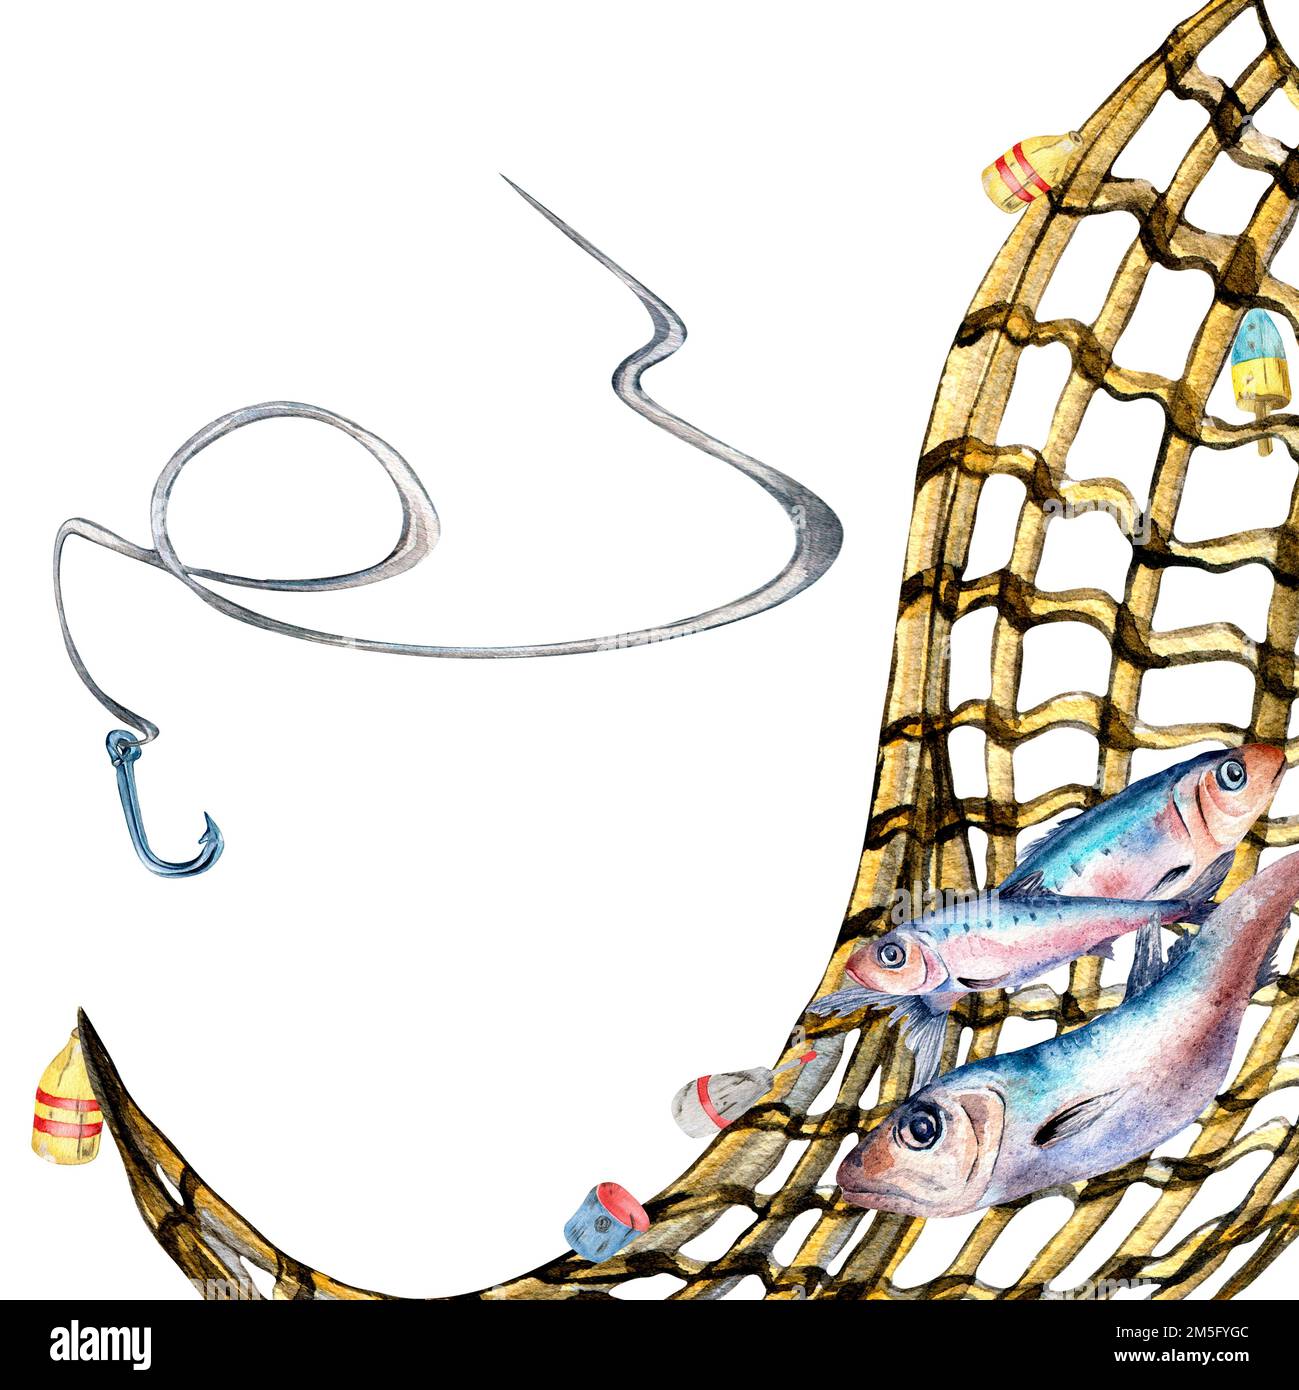 https://c8.alamy.com/comp/2M5FYGC/composition-of-sardines-and-fishnet-watercolor-illustration-isolated-on-white-fresh-fish-fishing-net-hook-hand-drawn-design-element-for-package-l-2M5FYGC.jpg